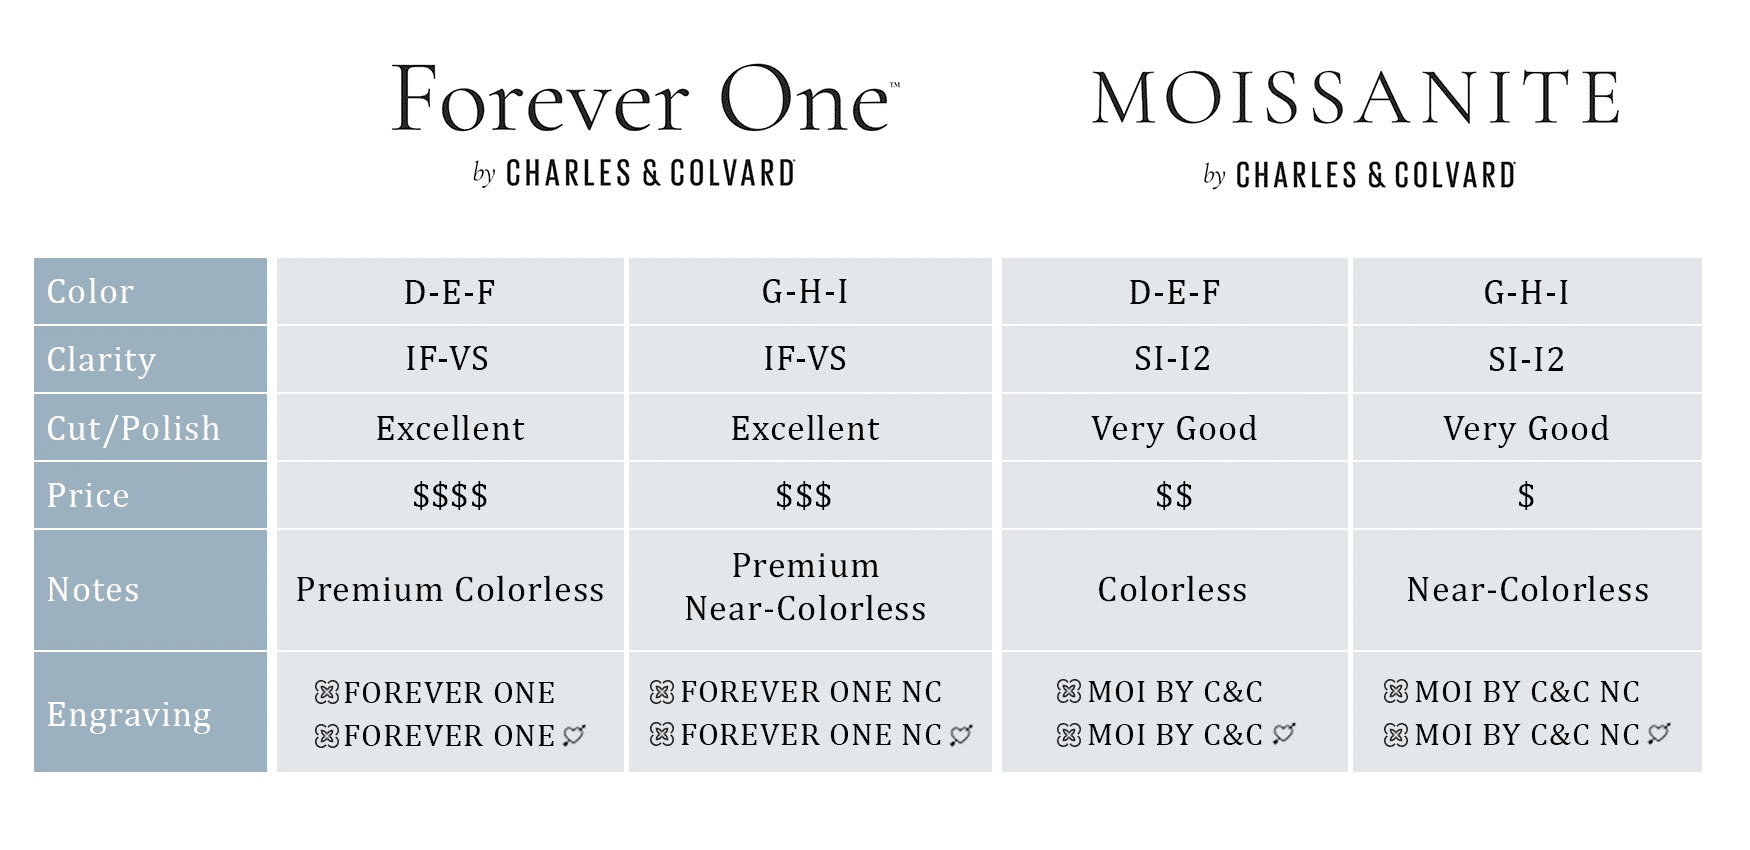 forever one and moissanite comparison guide tables with prices